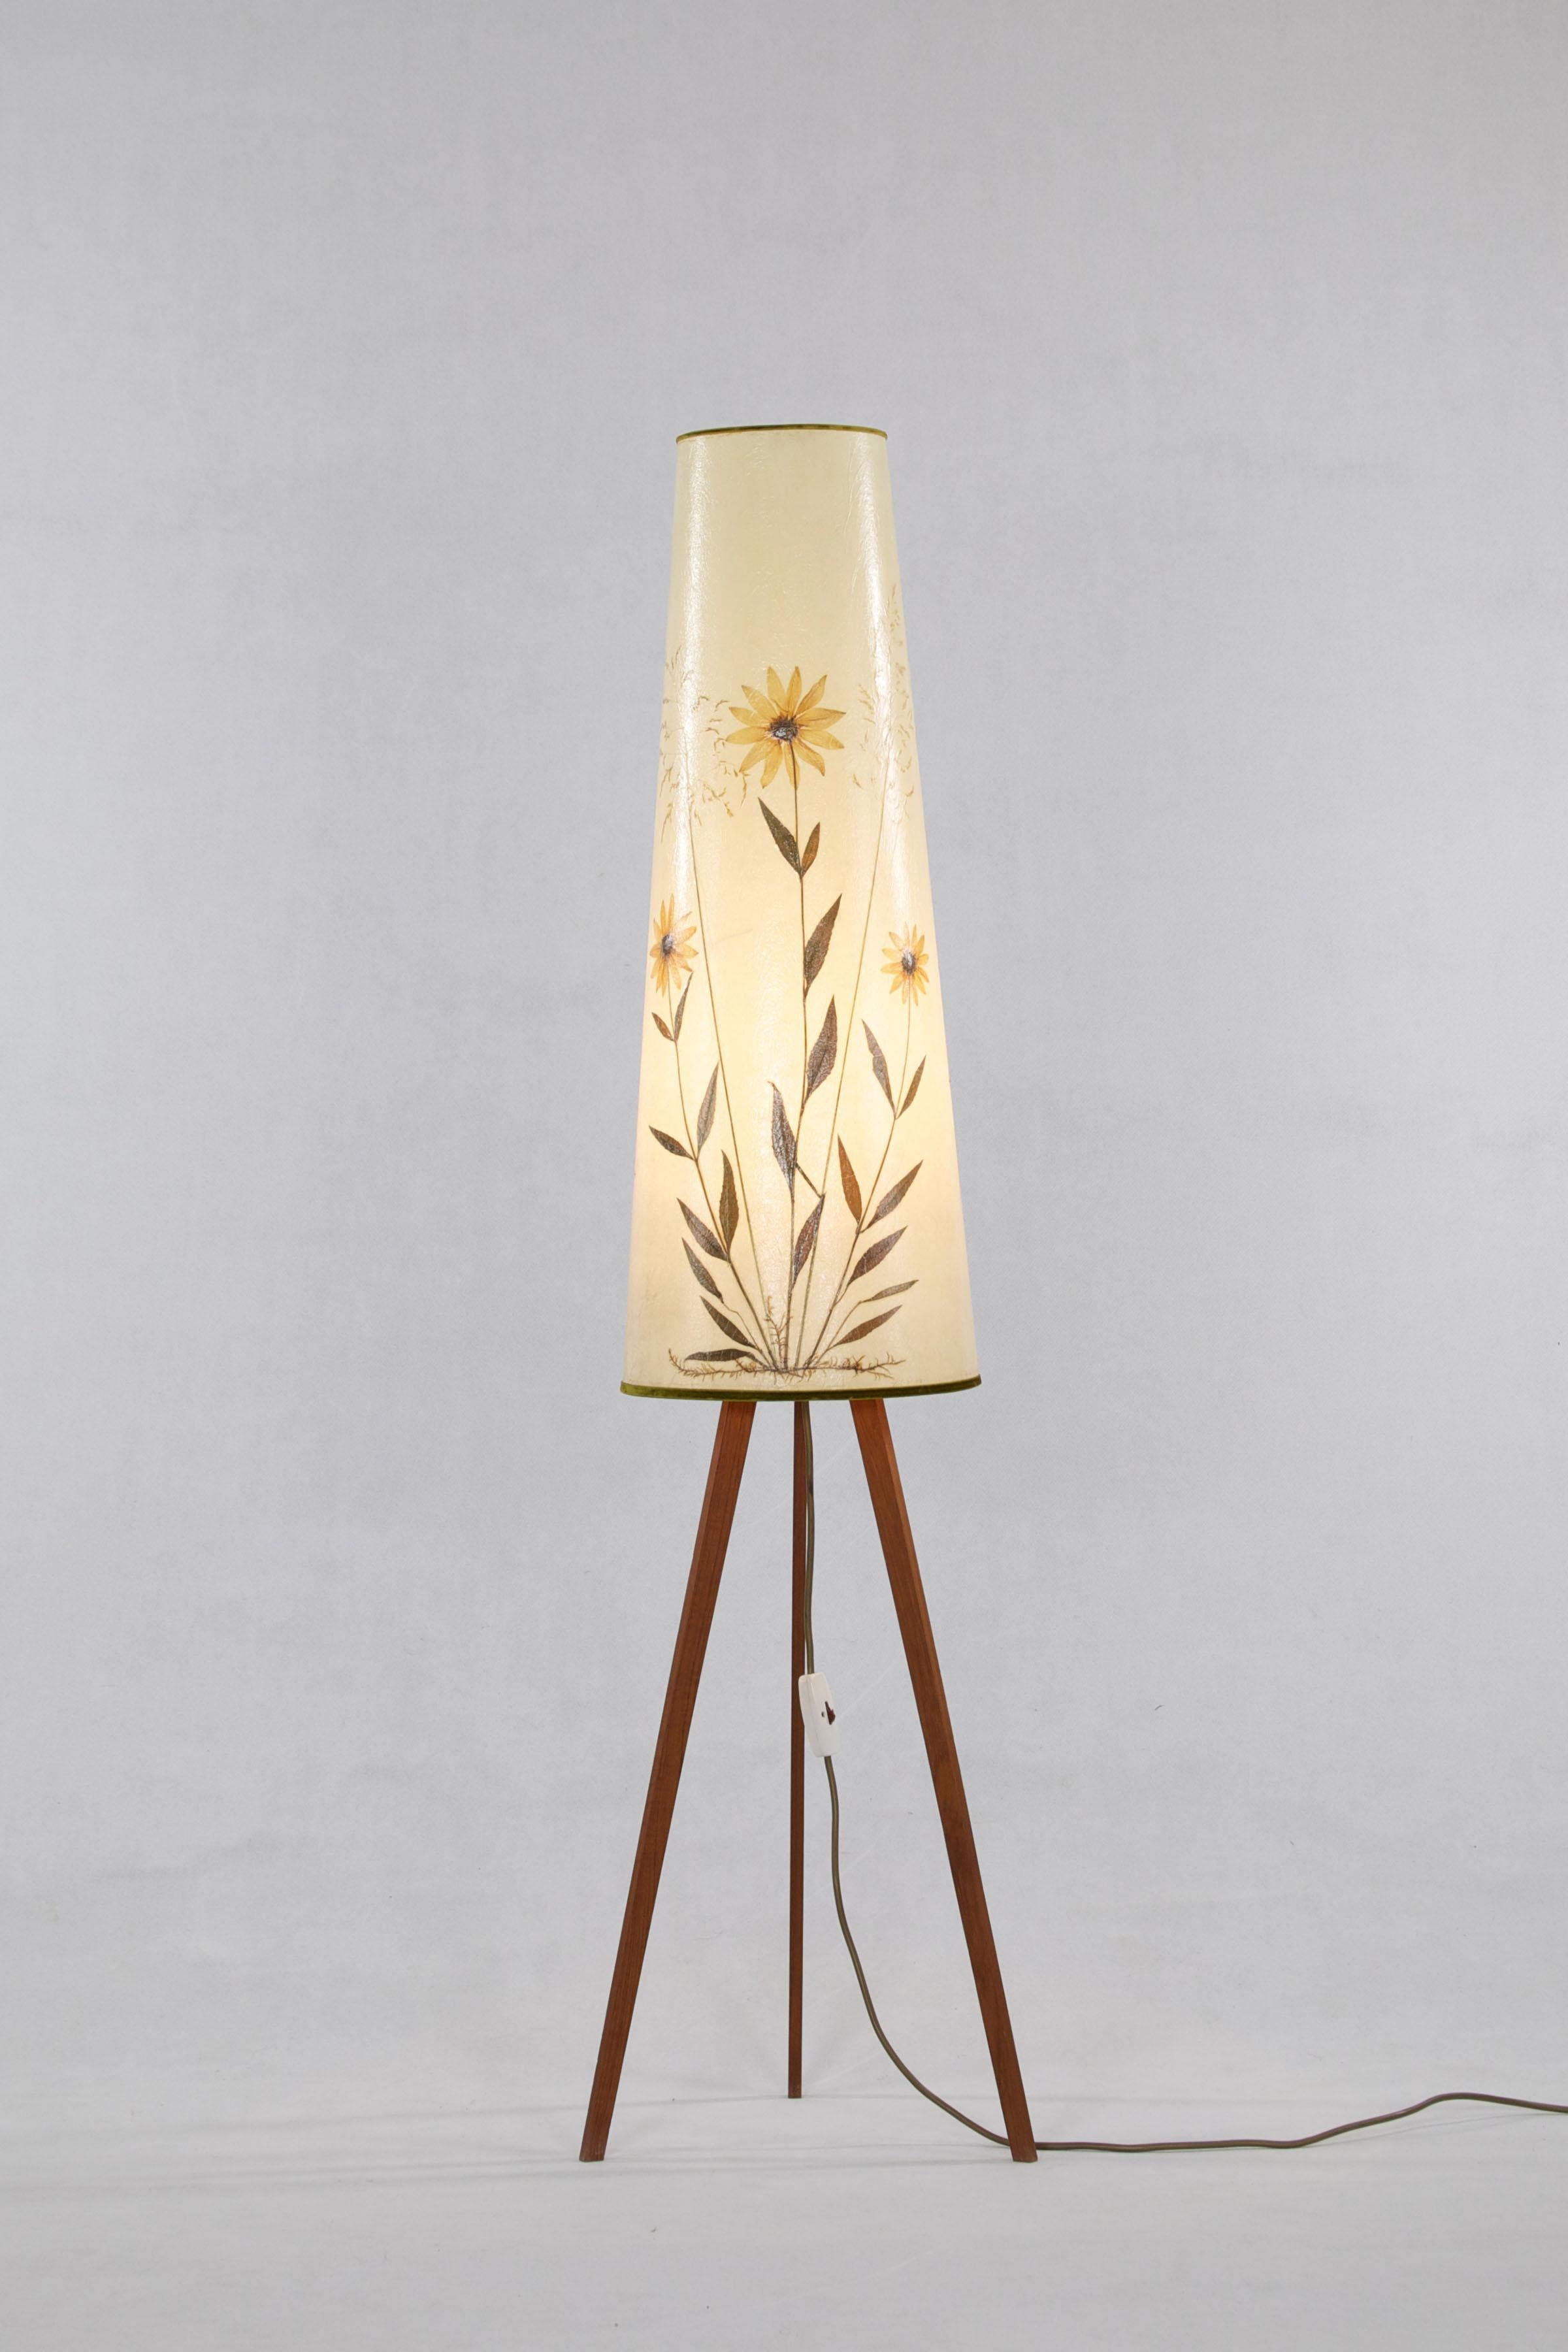 Floor lamp from Denmark, 1960s. This three-legged teak lamp has a hide shade with incorporated dried flowers which cause a beautiful lighting experience. 

Feel free to contact us for more detailed pictures.